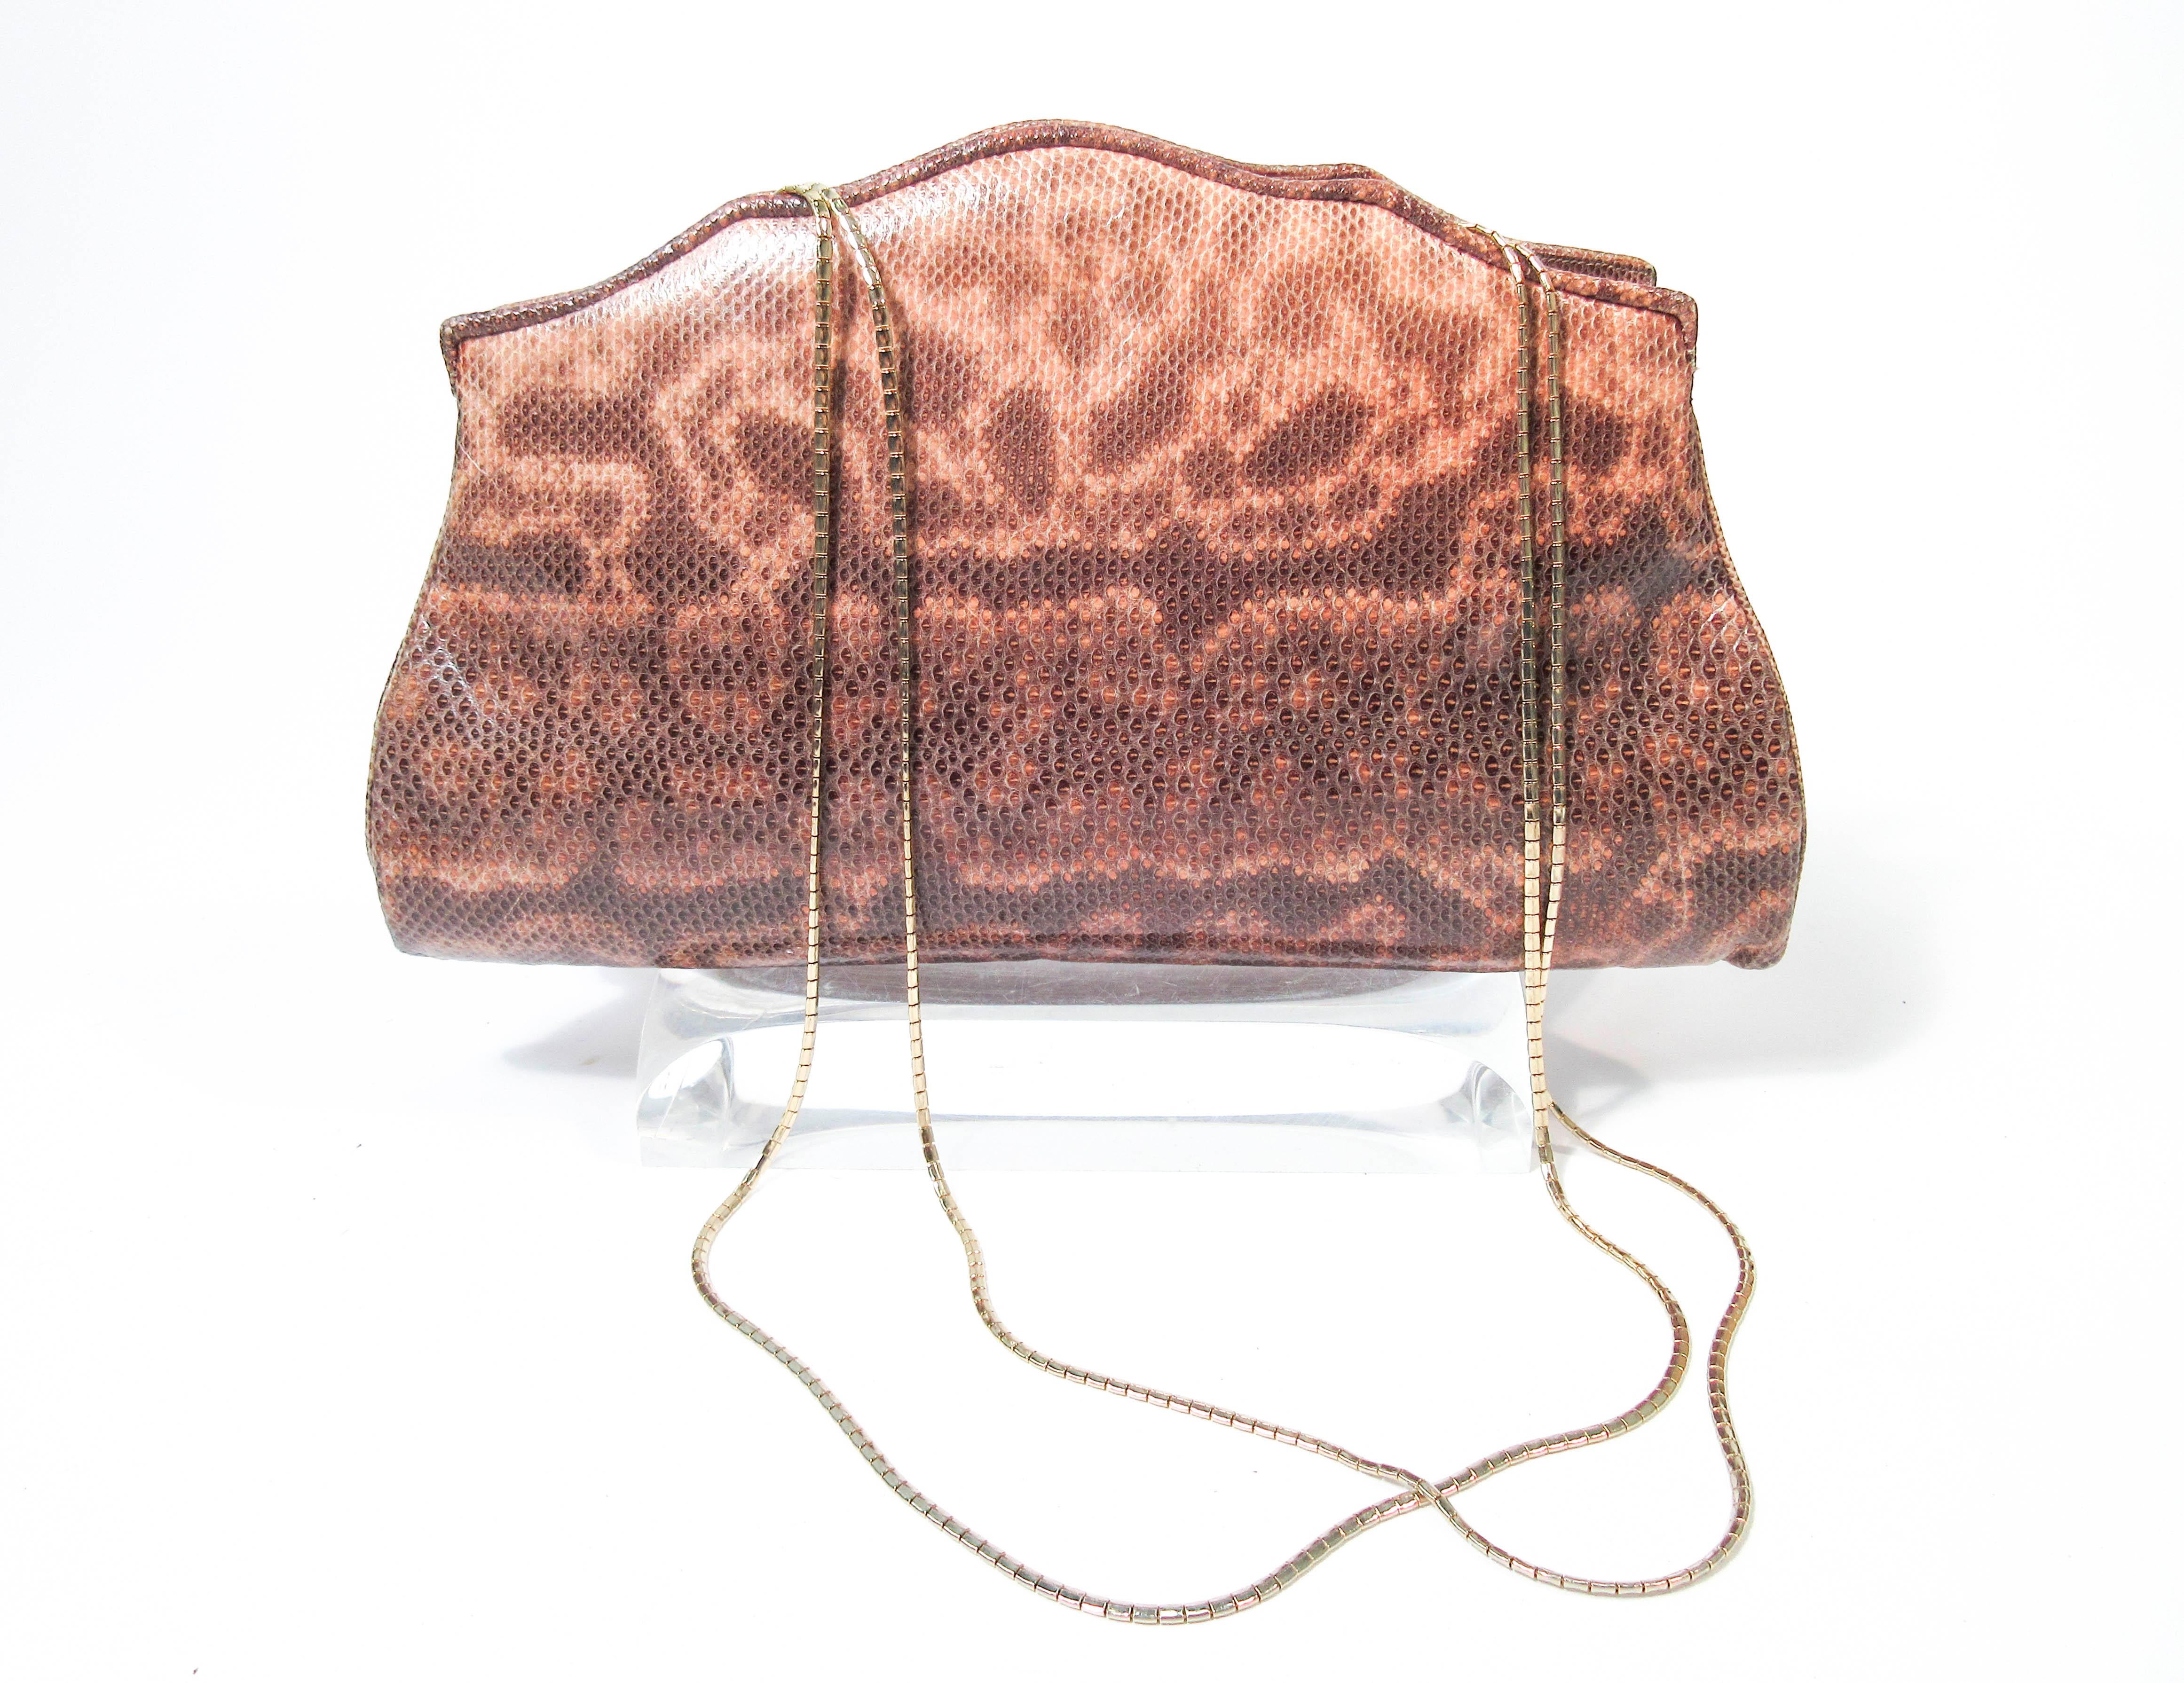 This Judith Leiber purse is composed of a nude to brown ombre lizard skin. Features an interior gold frame with two side pockets. There is an interior pocket and two slide pockets. Comes with coin purse and sleeper pouch. In great vintage condition